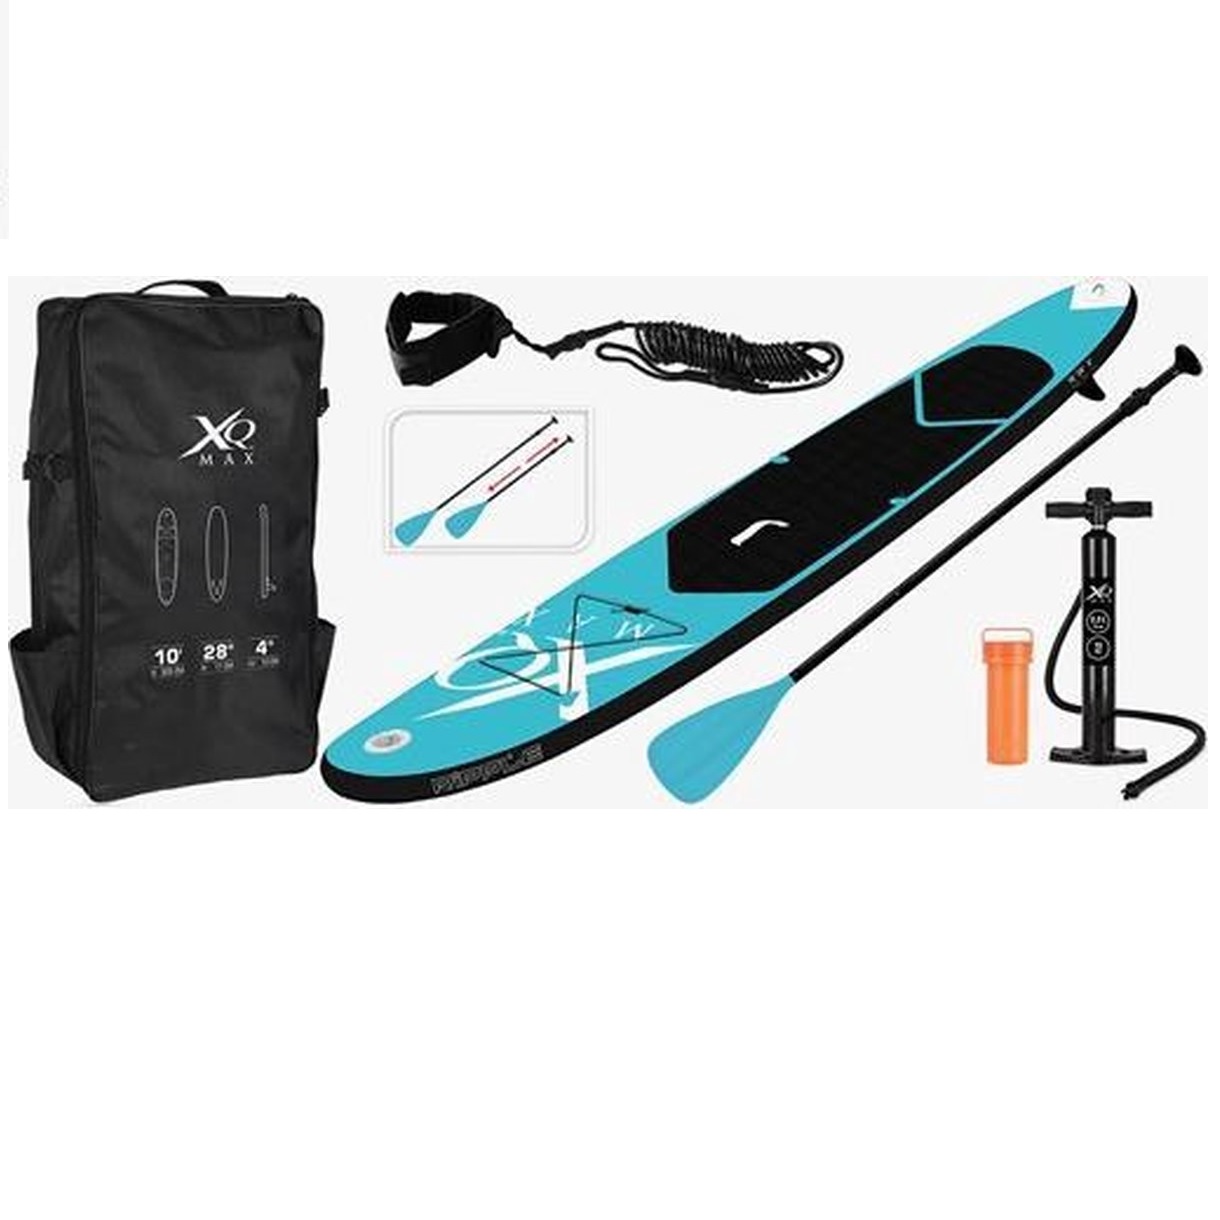 PADDLE KIT COMPLET